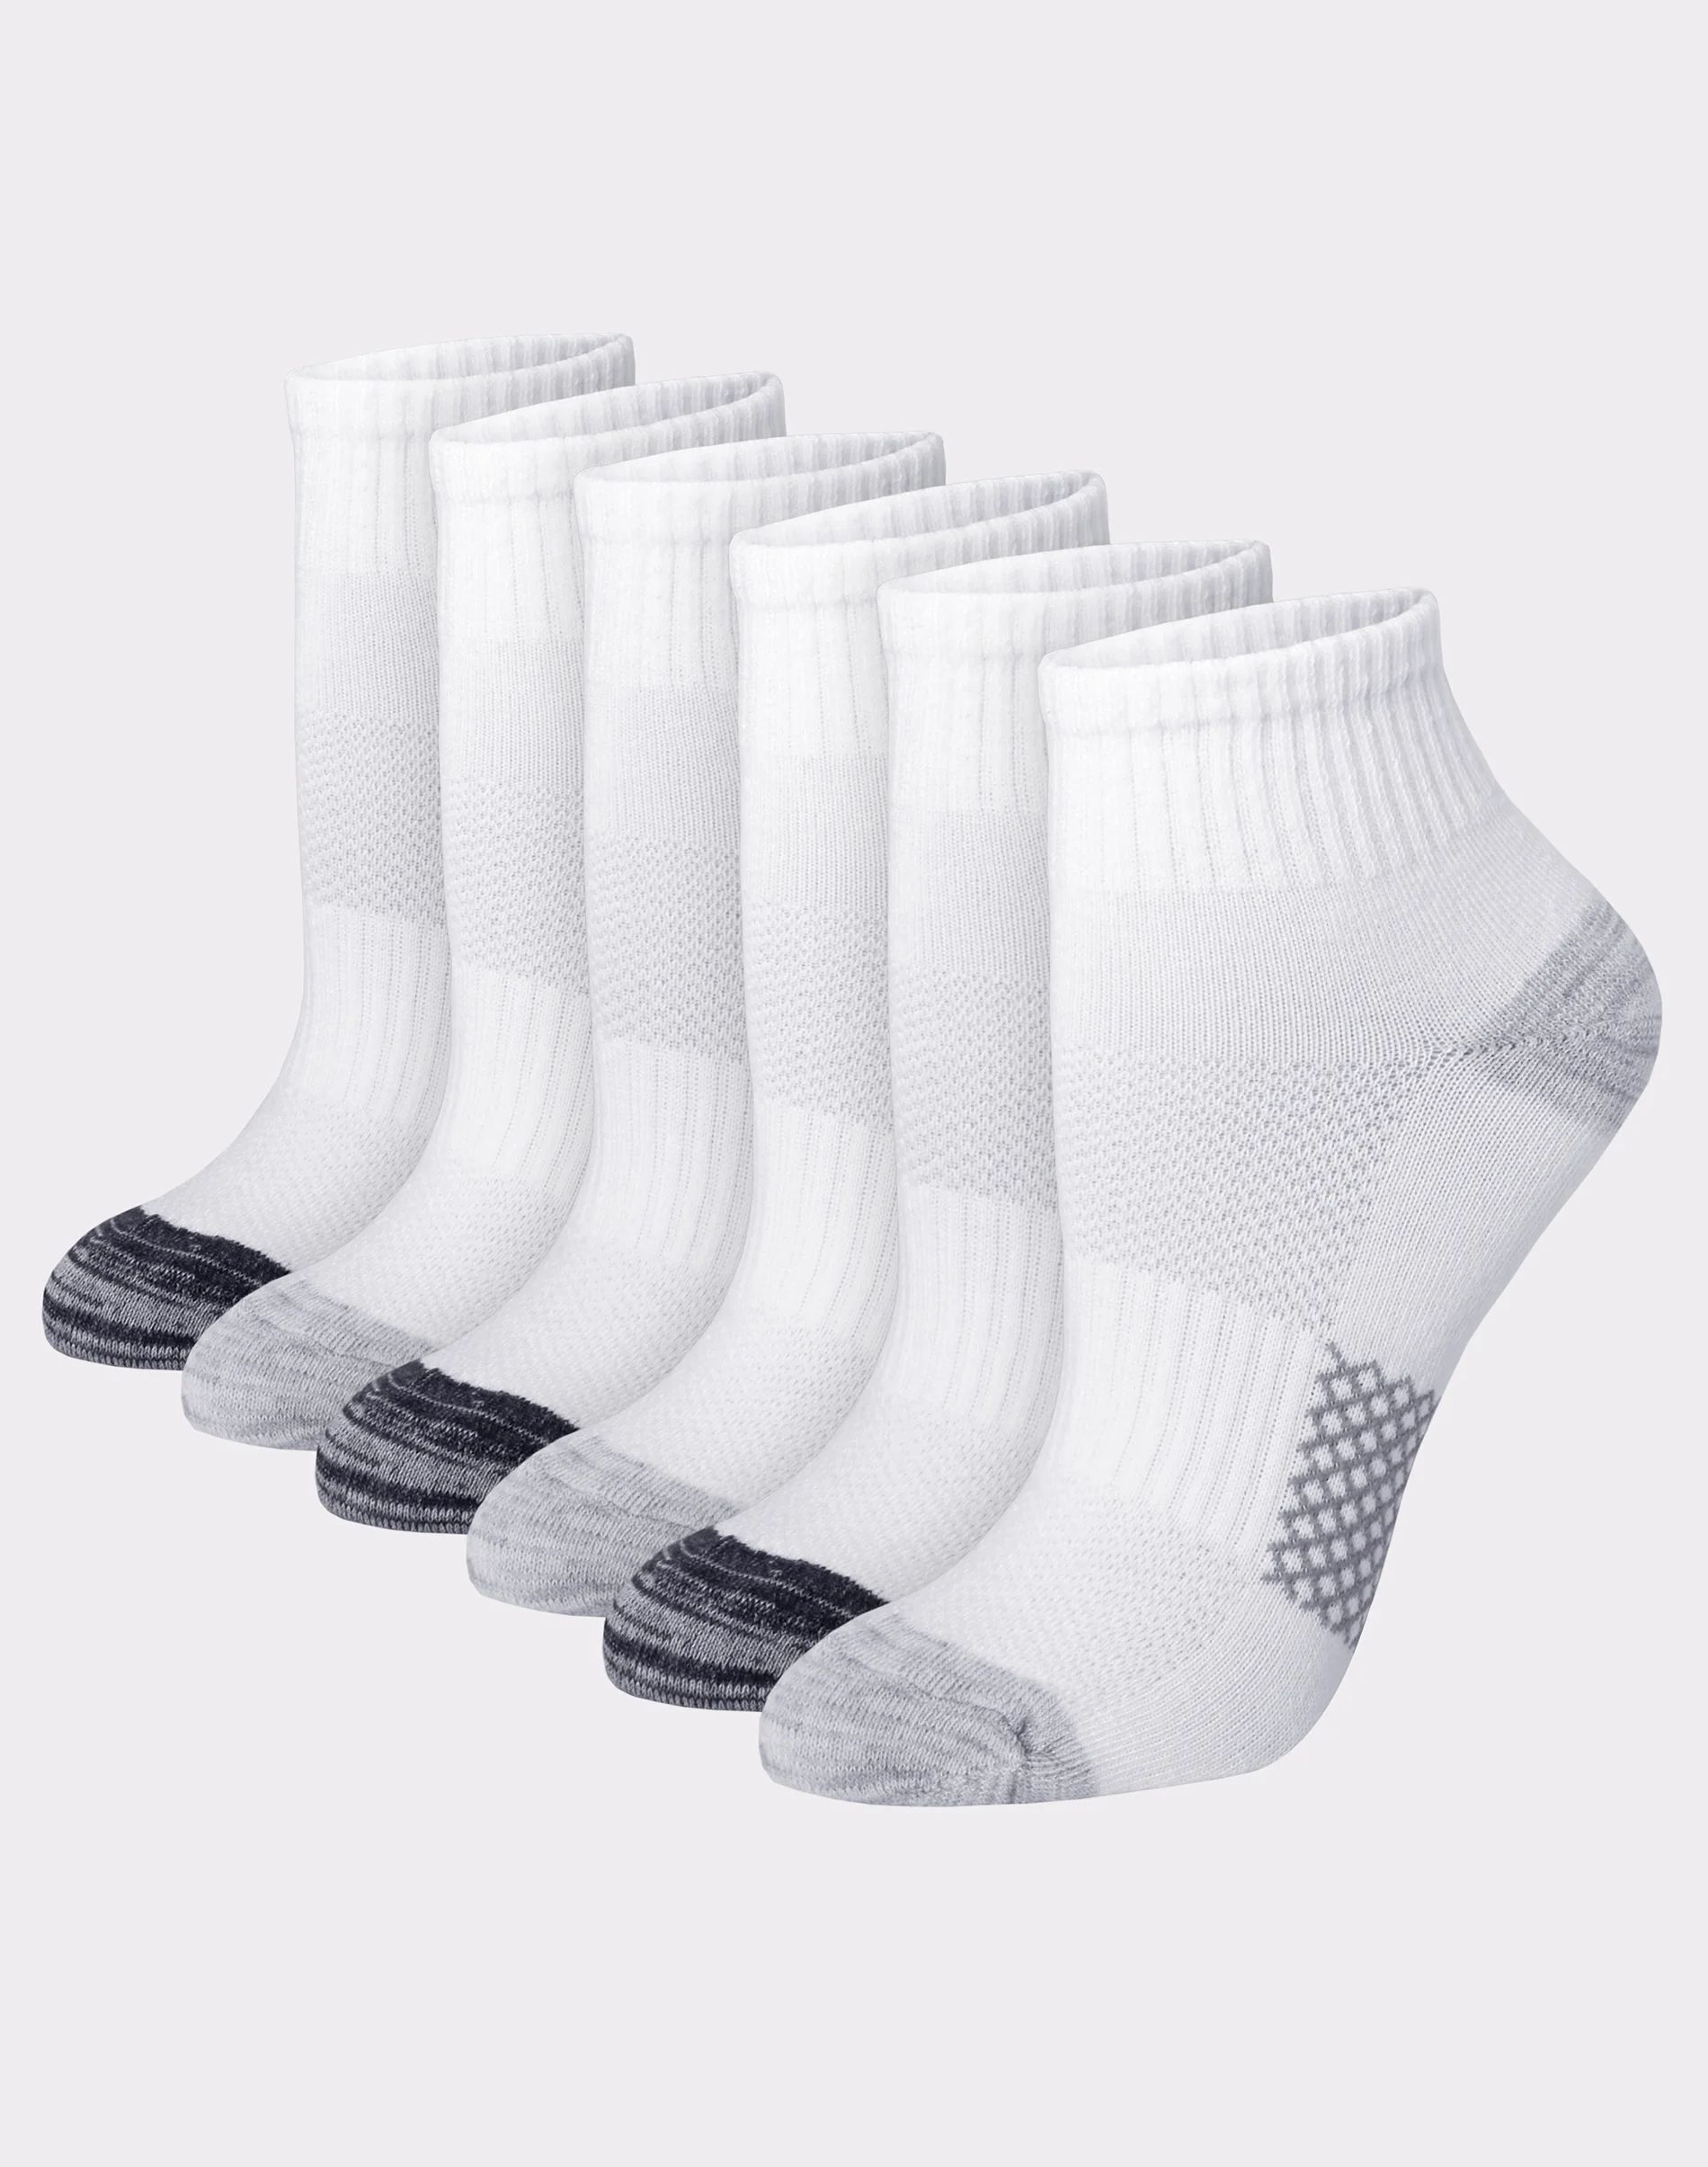 Hanes Women's Performance Cushioned Ankle Socks, 6-Pack | Hanes.com